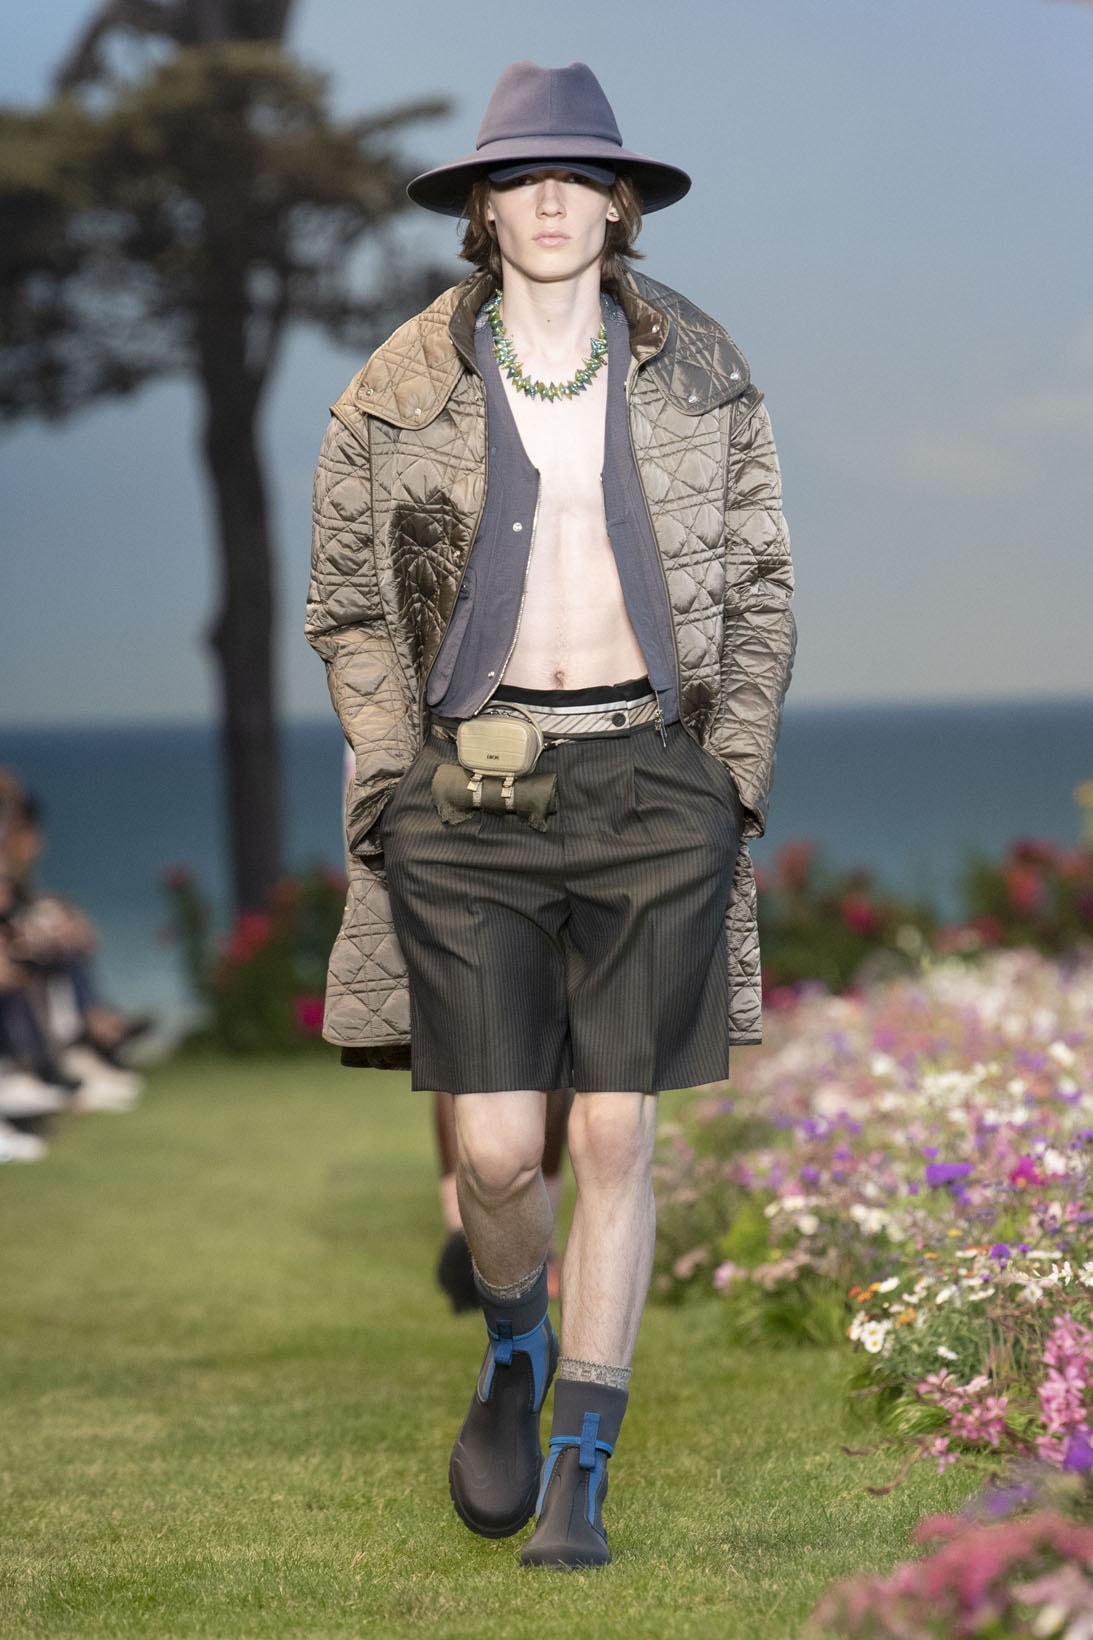 Summer Capsule Wardrobe Essentials From Burberry, Dior, and Loewe